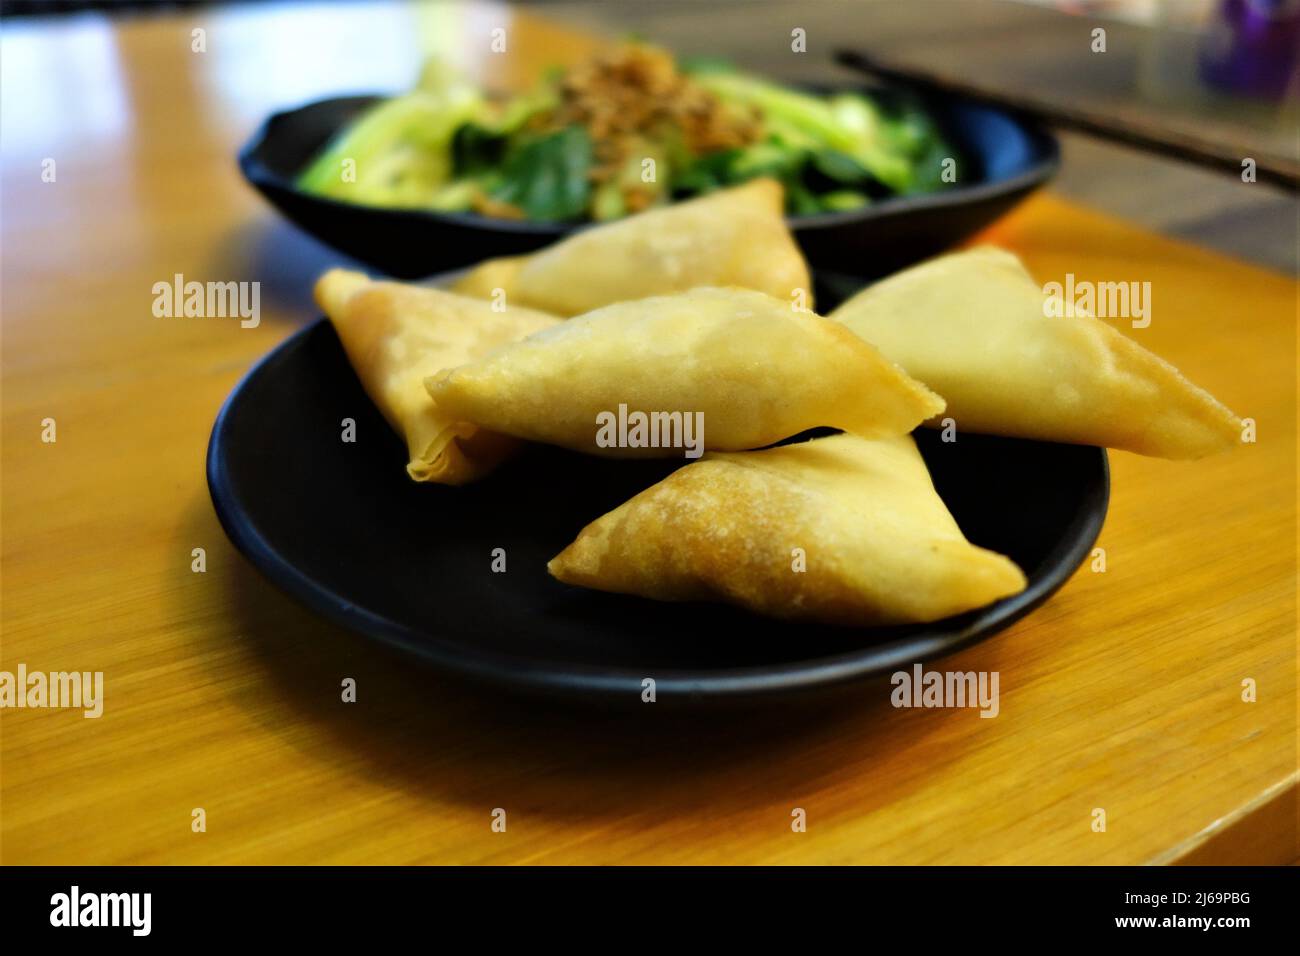 Samosas on a black plate as a close up with green vegetables in the background Stock Photo